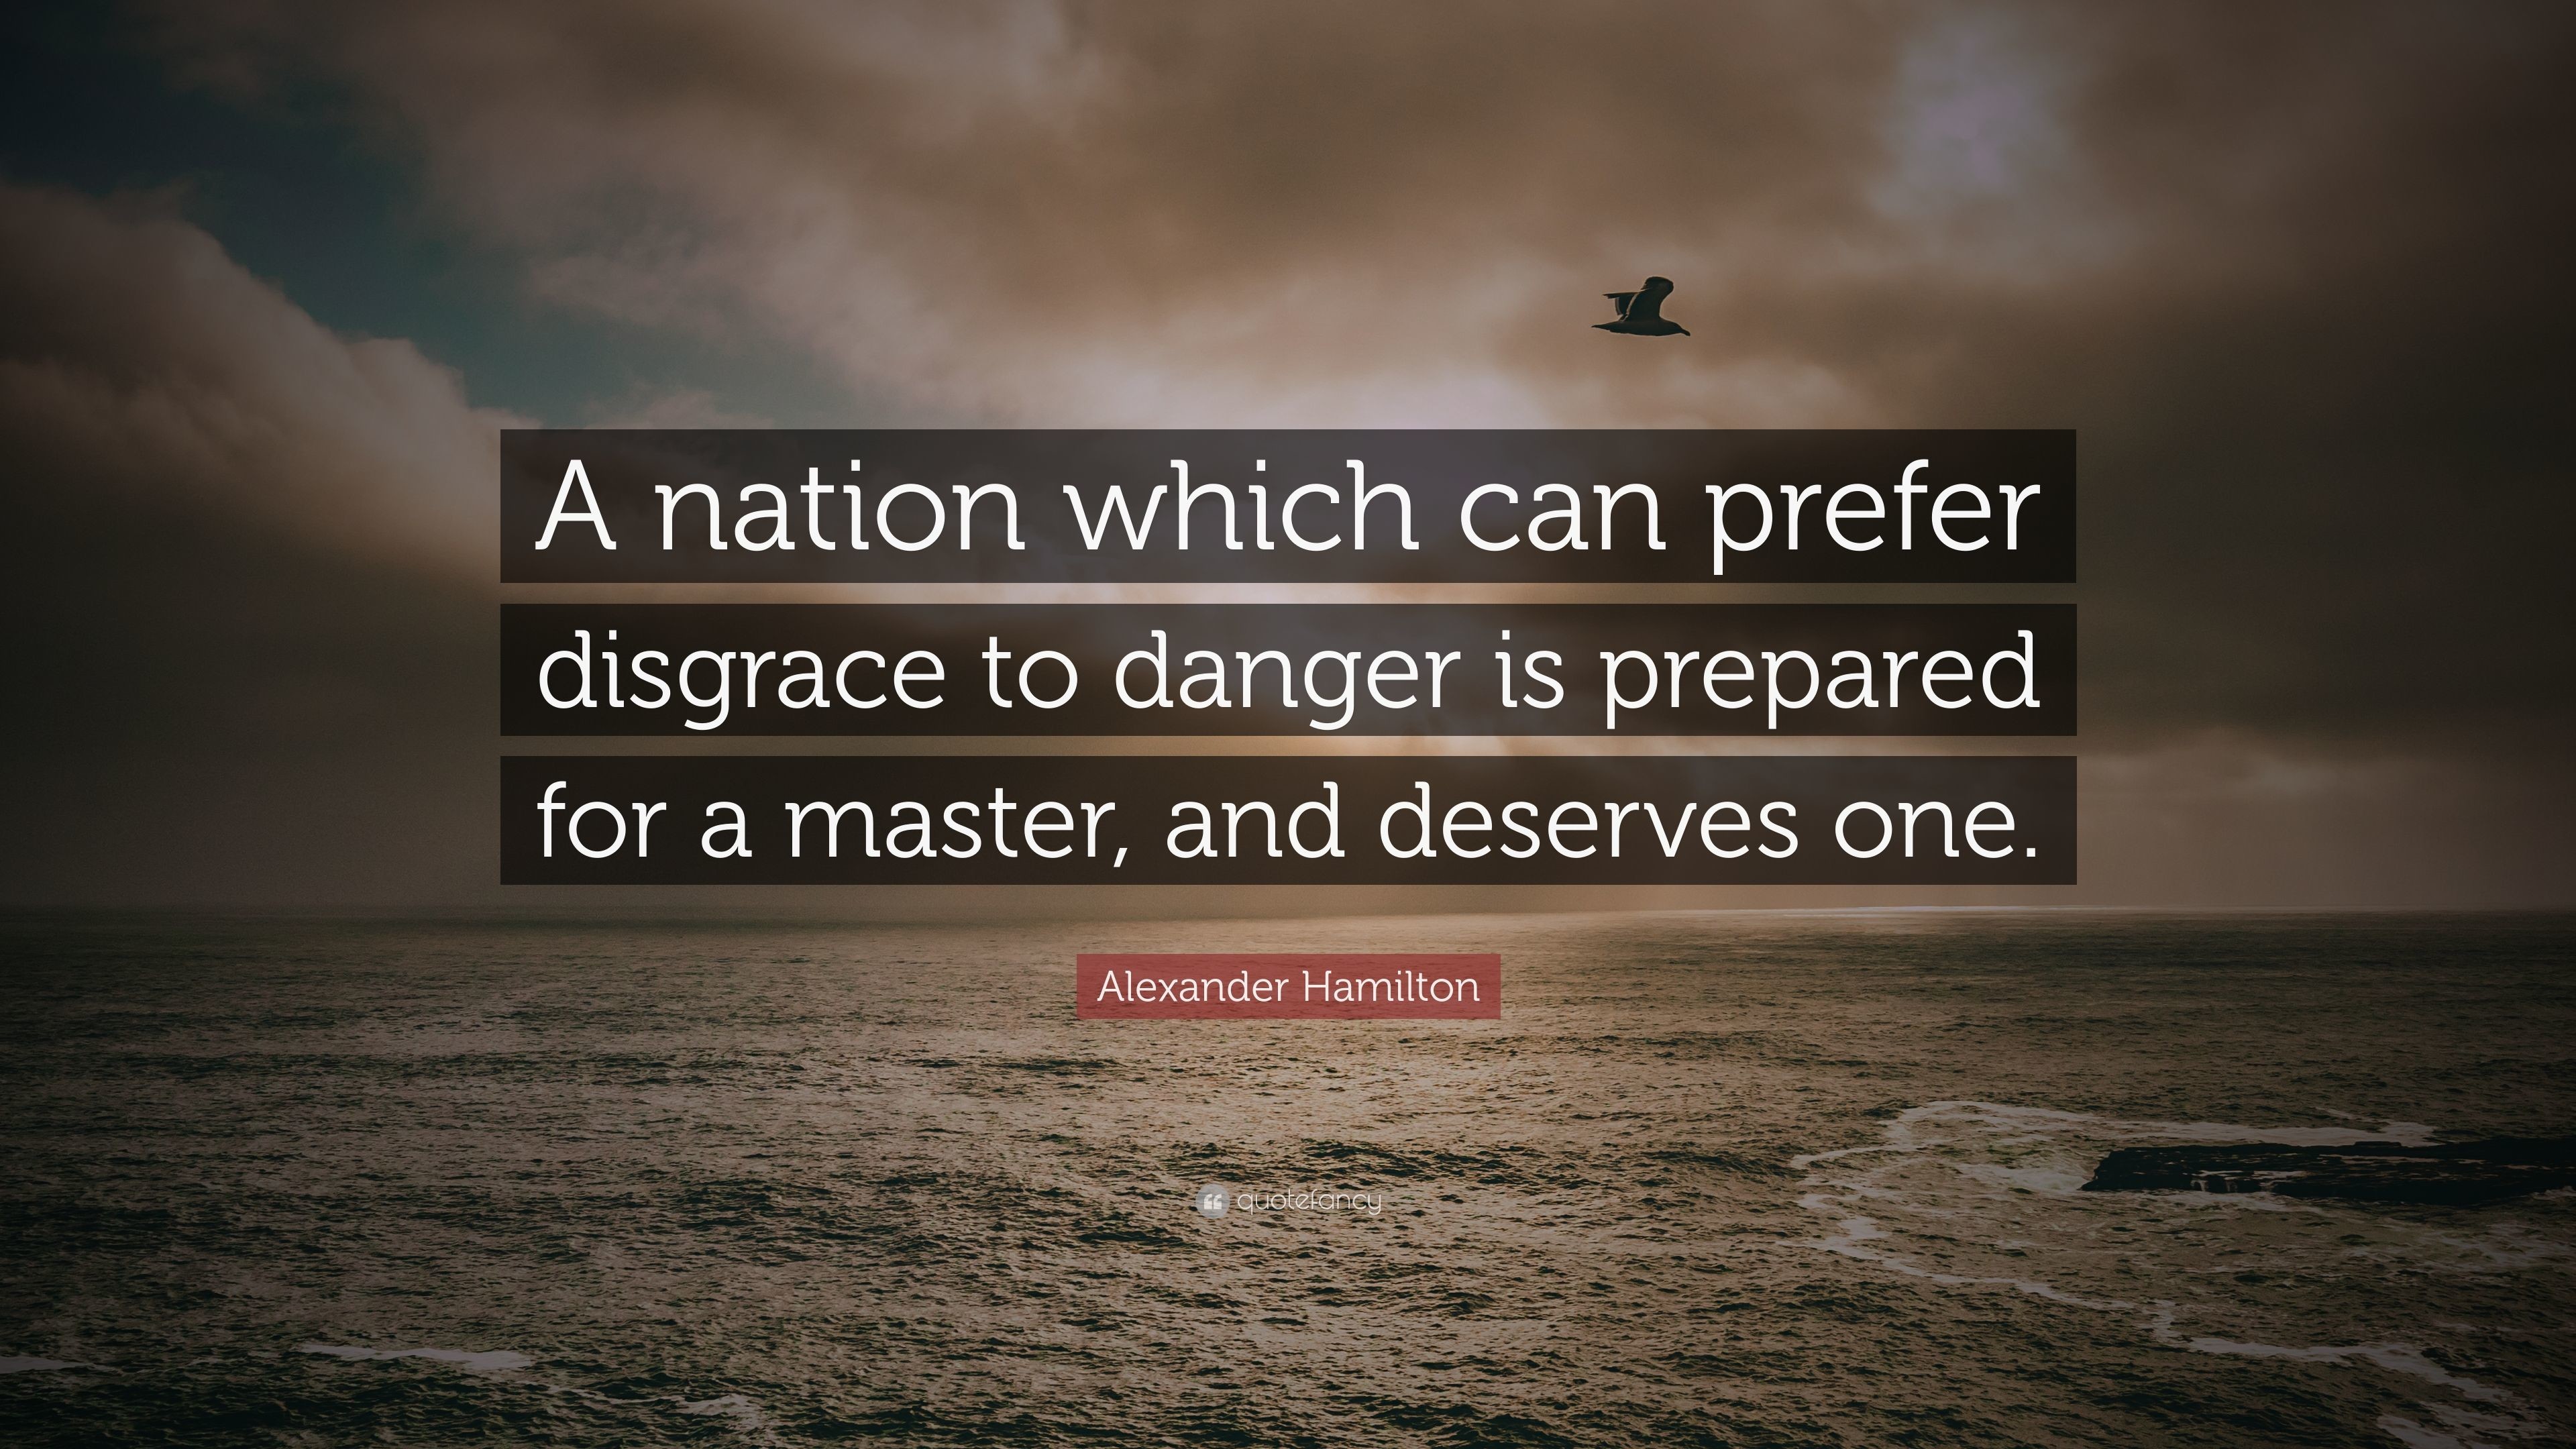 3840x2160 Alexander Hamilton Quote: “A nation which can prefer disgrace to danger is  prepared for